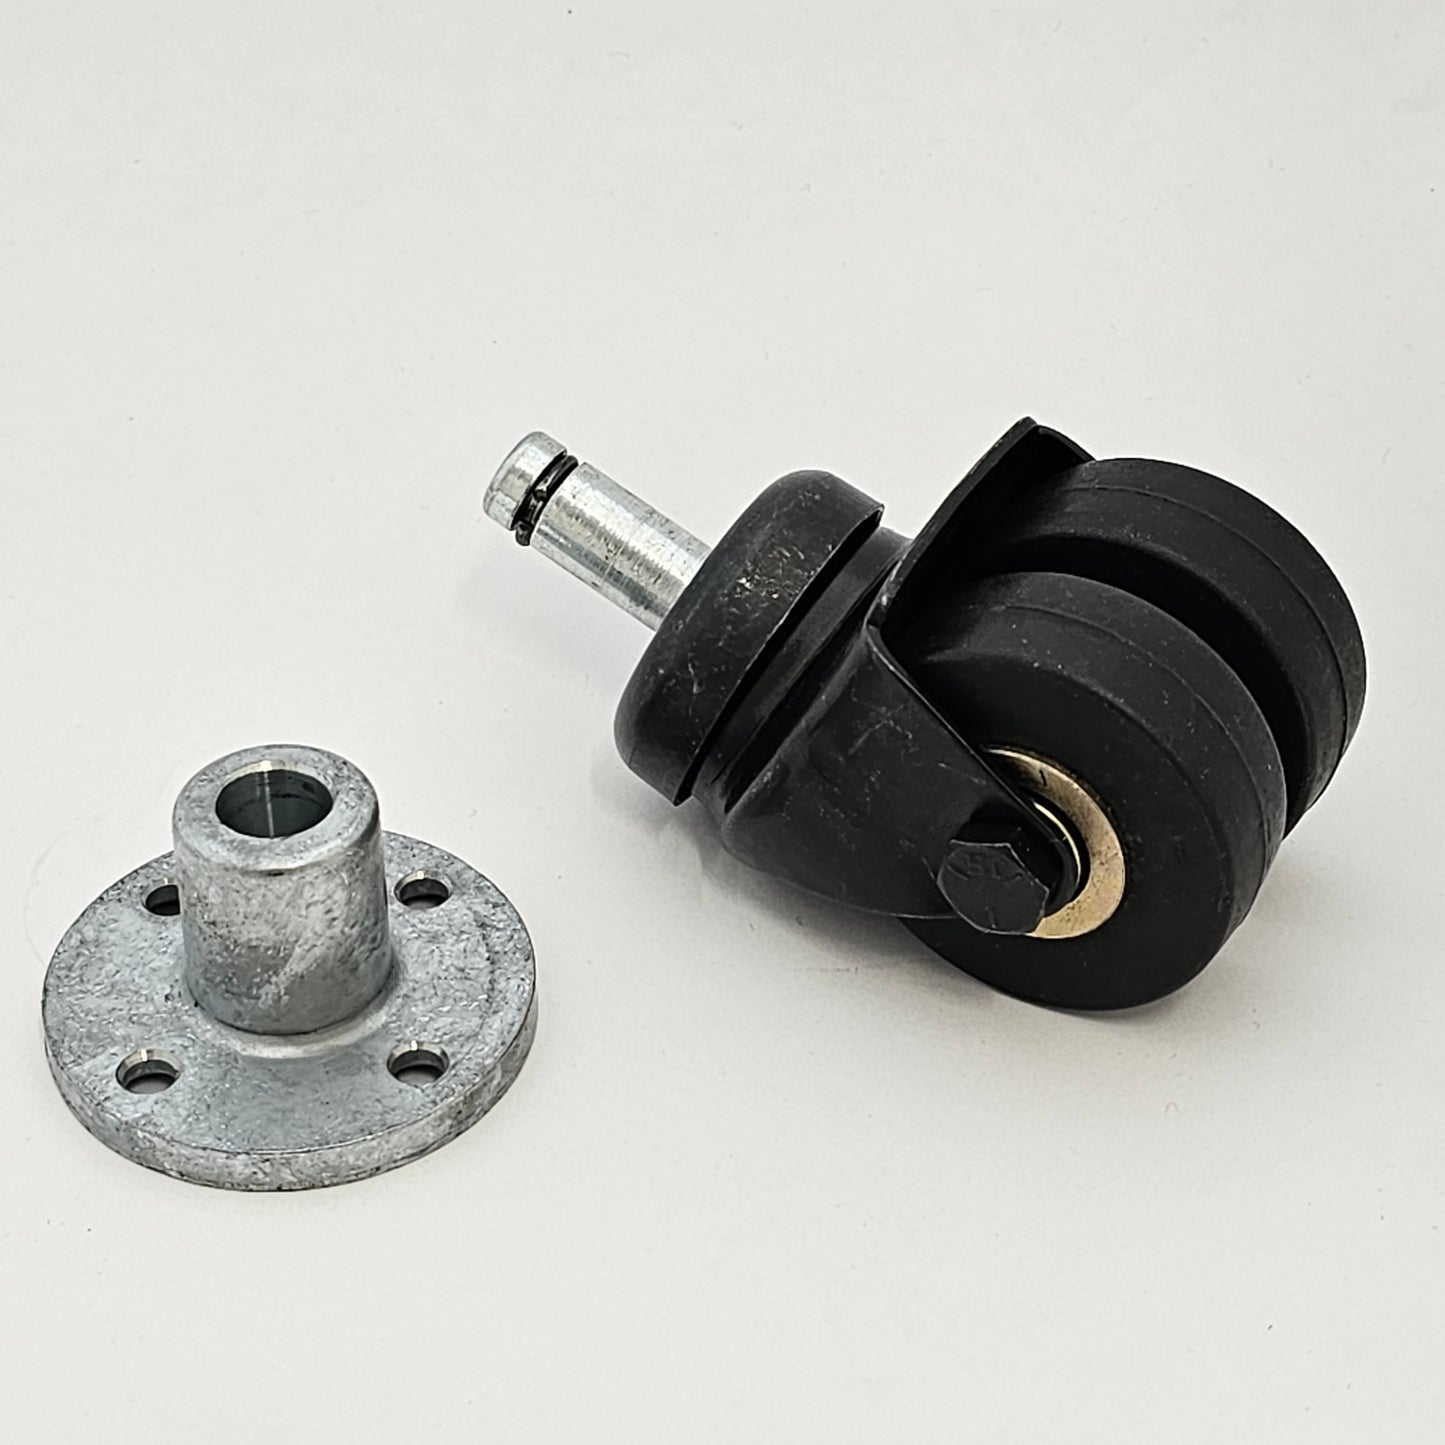 Darnell HD casters with ball bearings in wheels